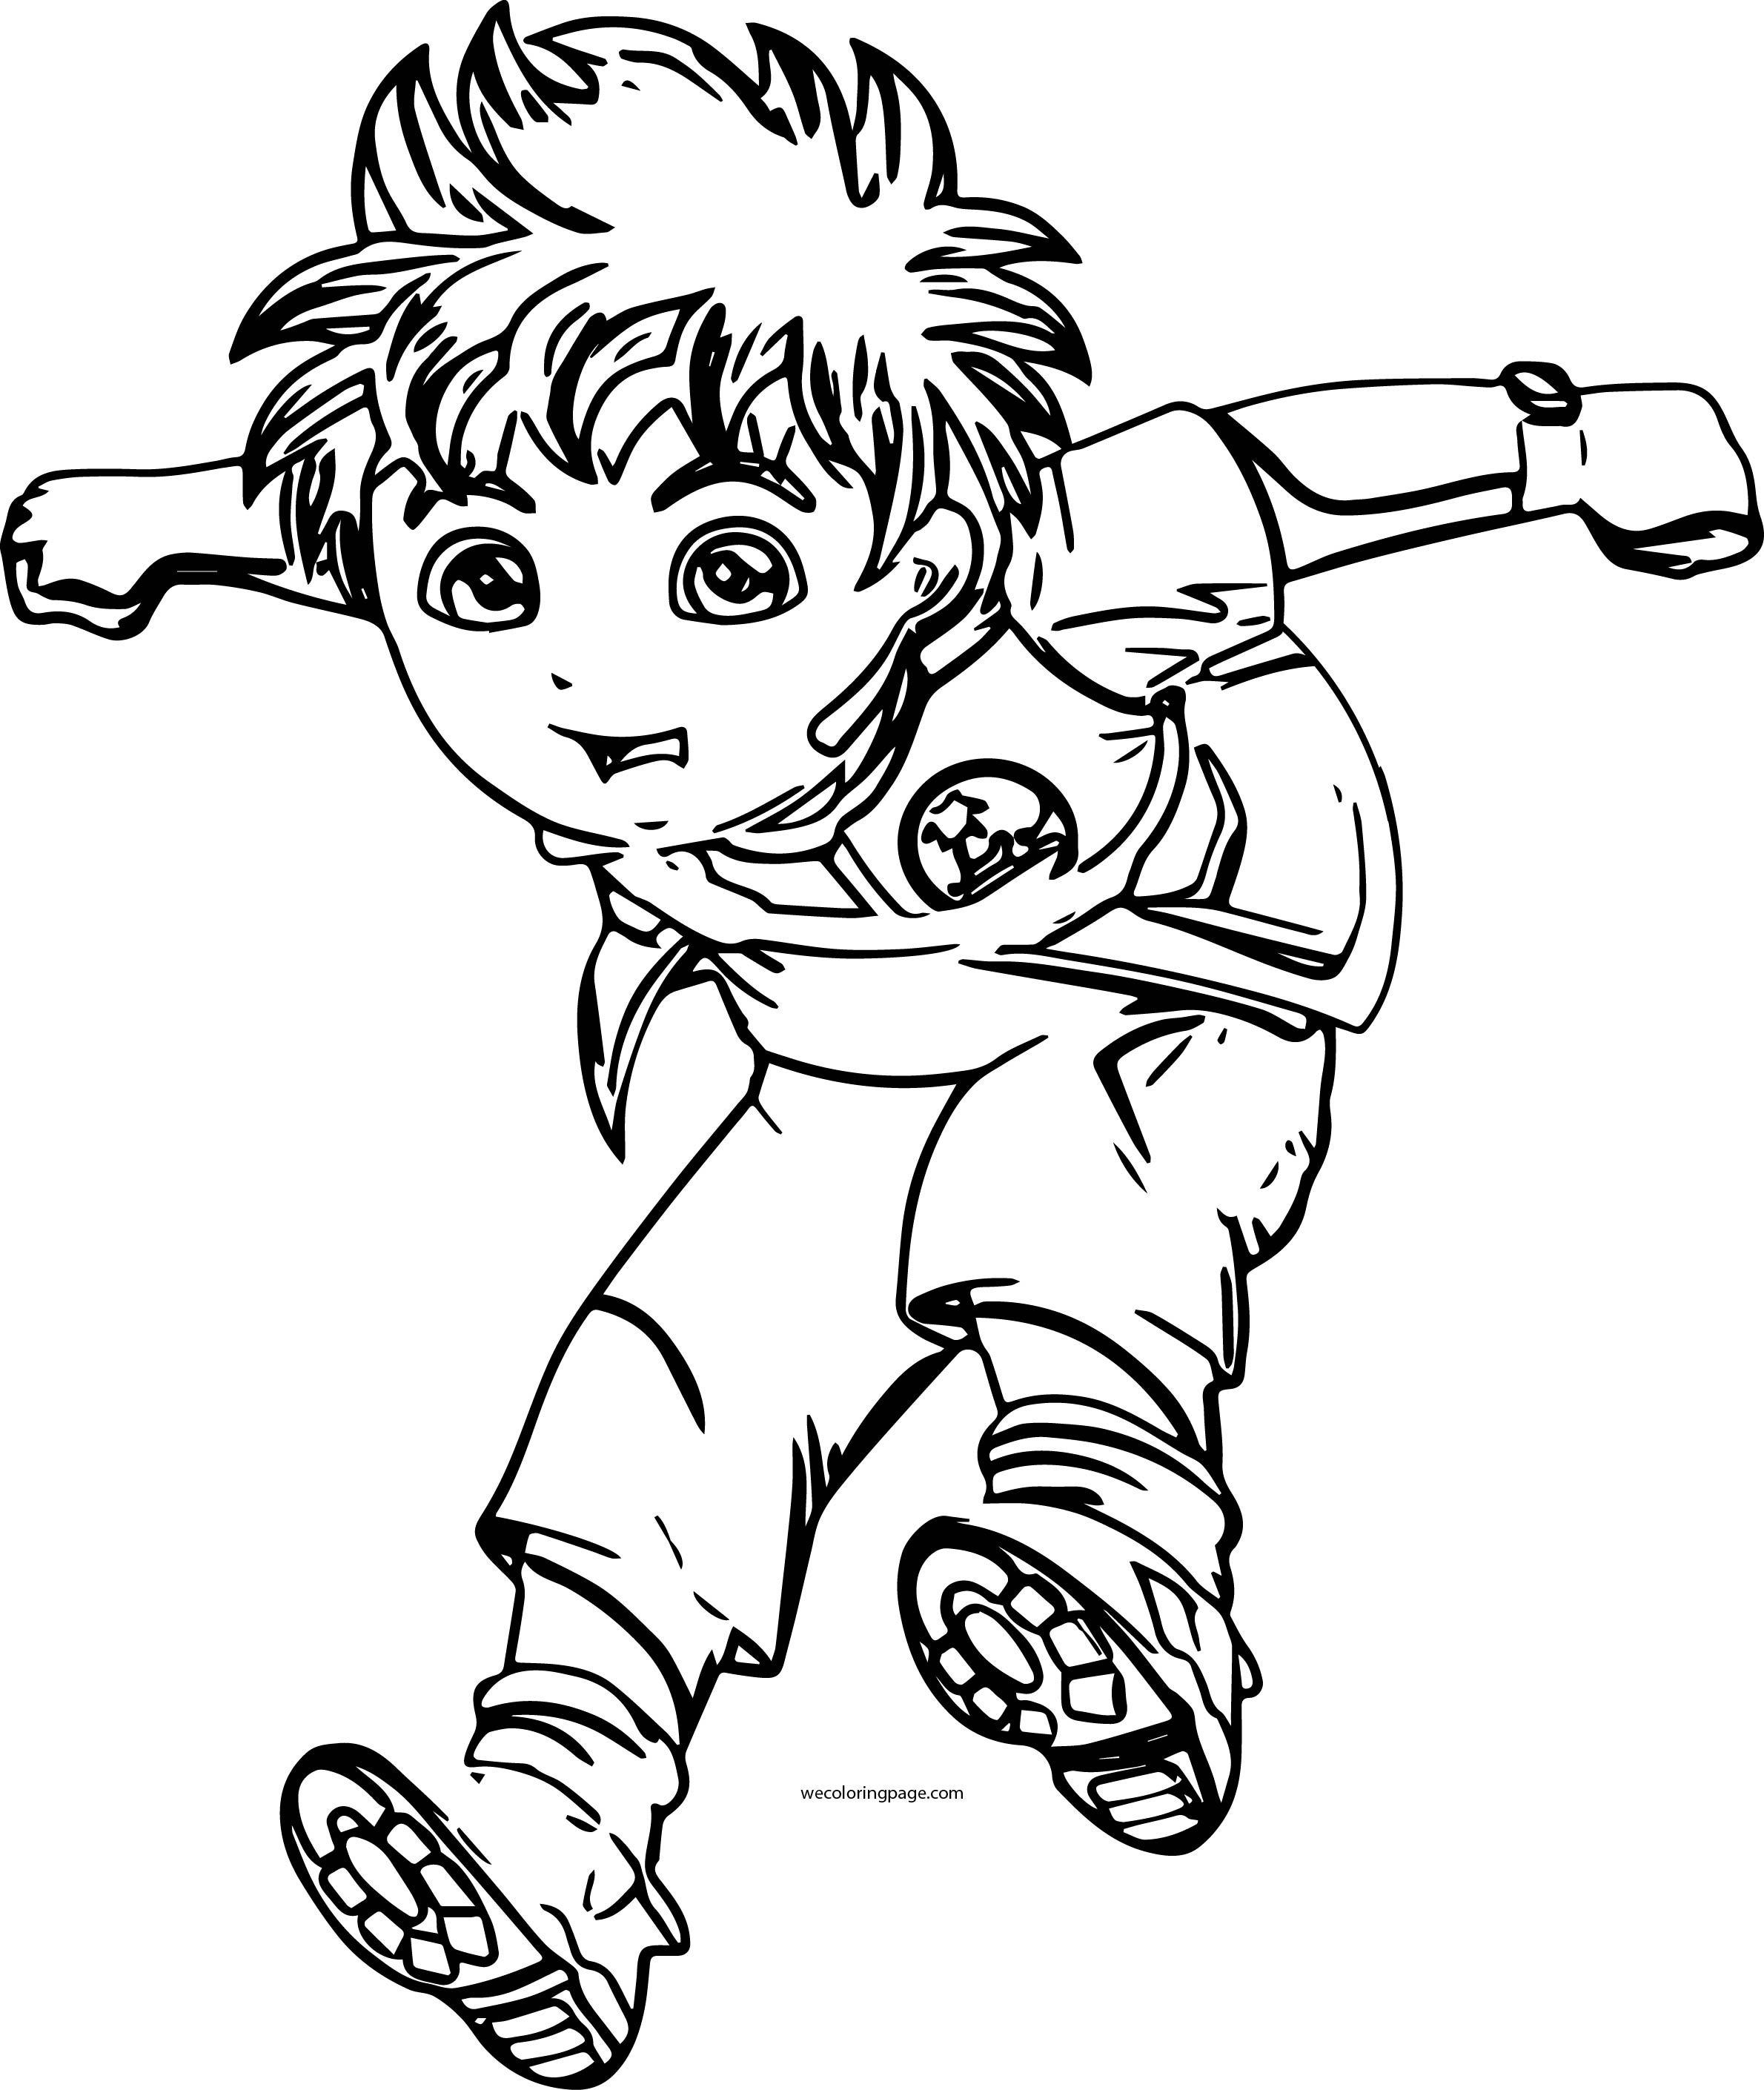 Go Diego Go Coloring Pages | Wecoloringpage